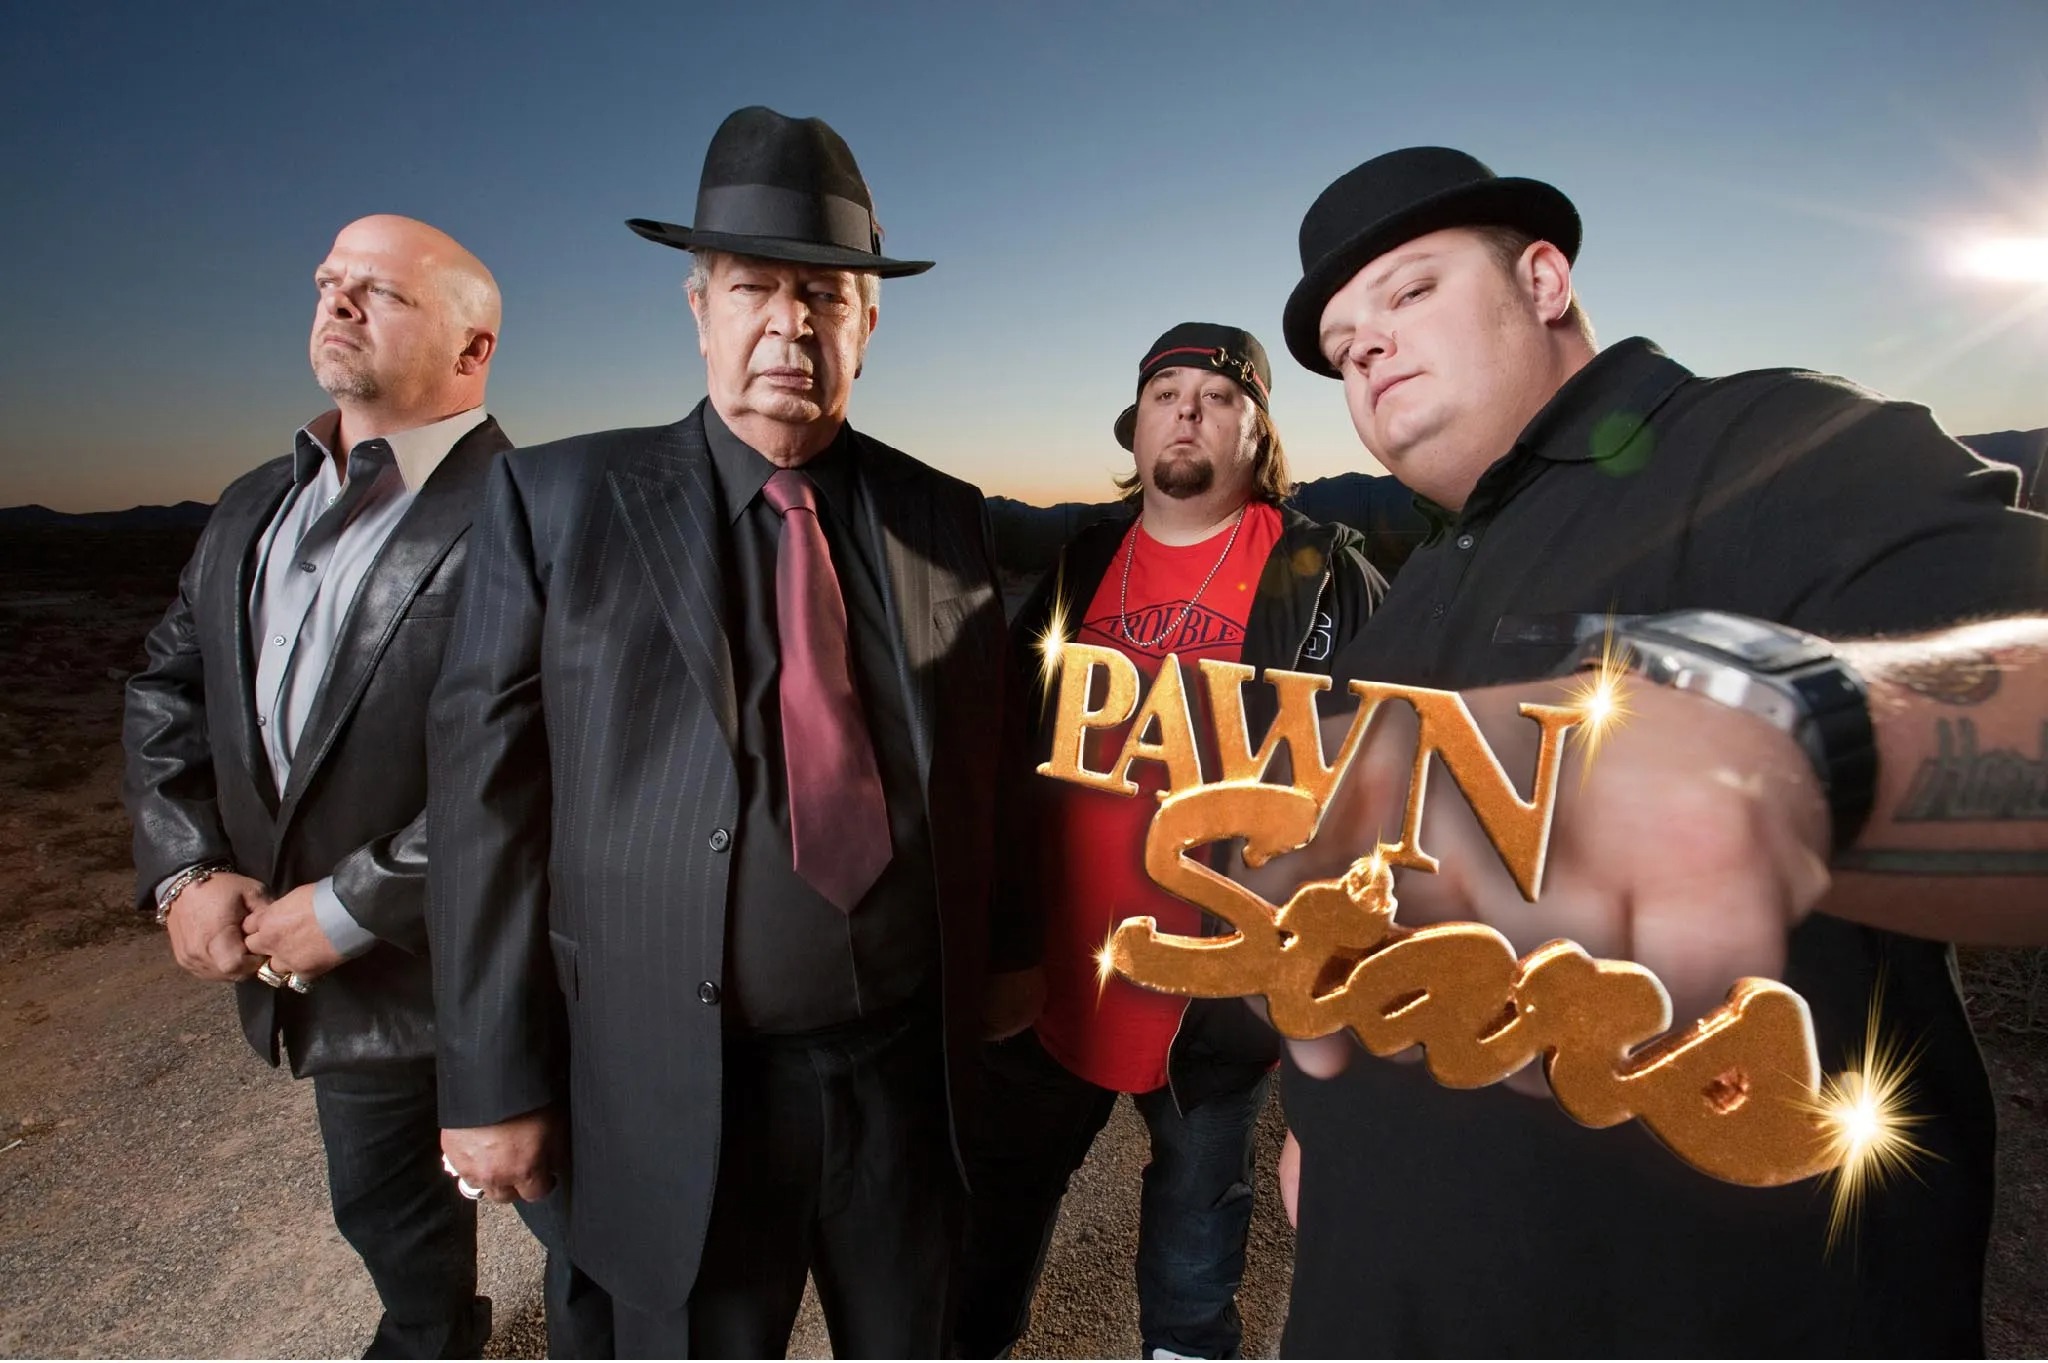 Adam has not appeared in any of the Pawn Star's episodes